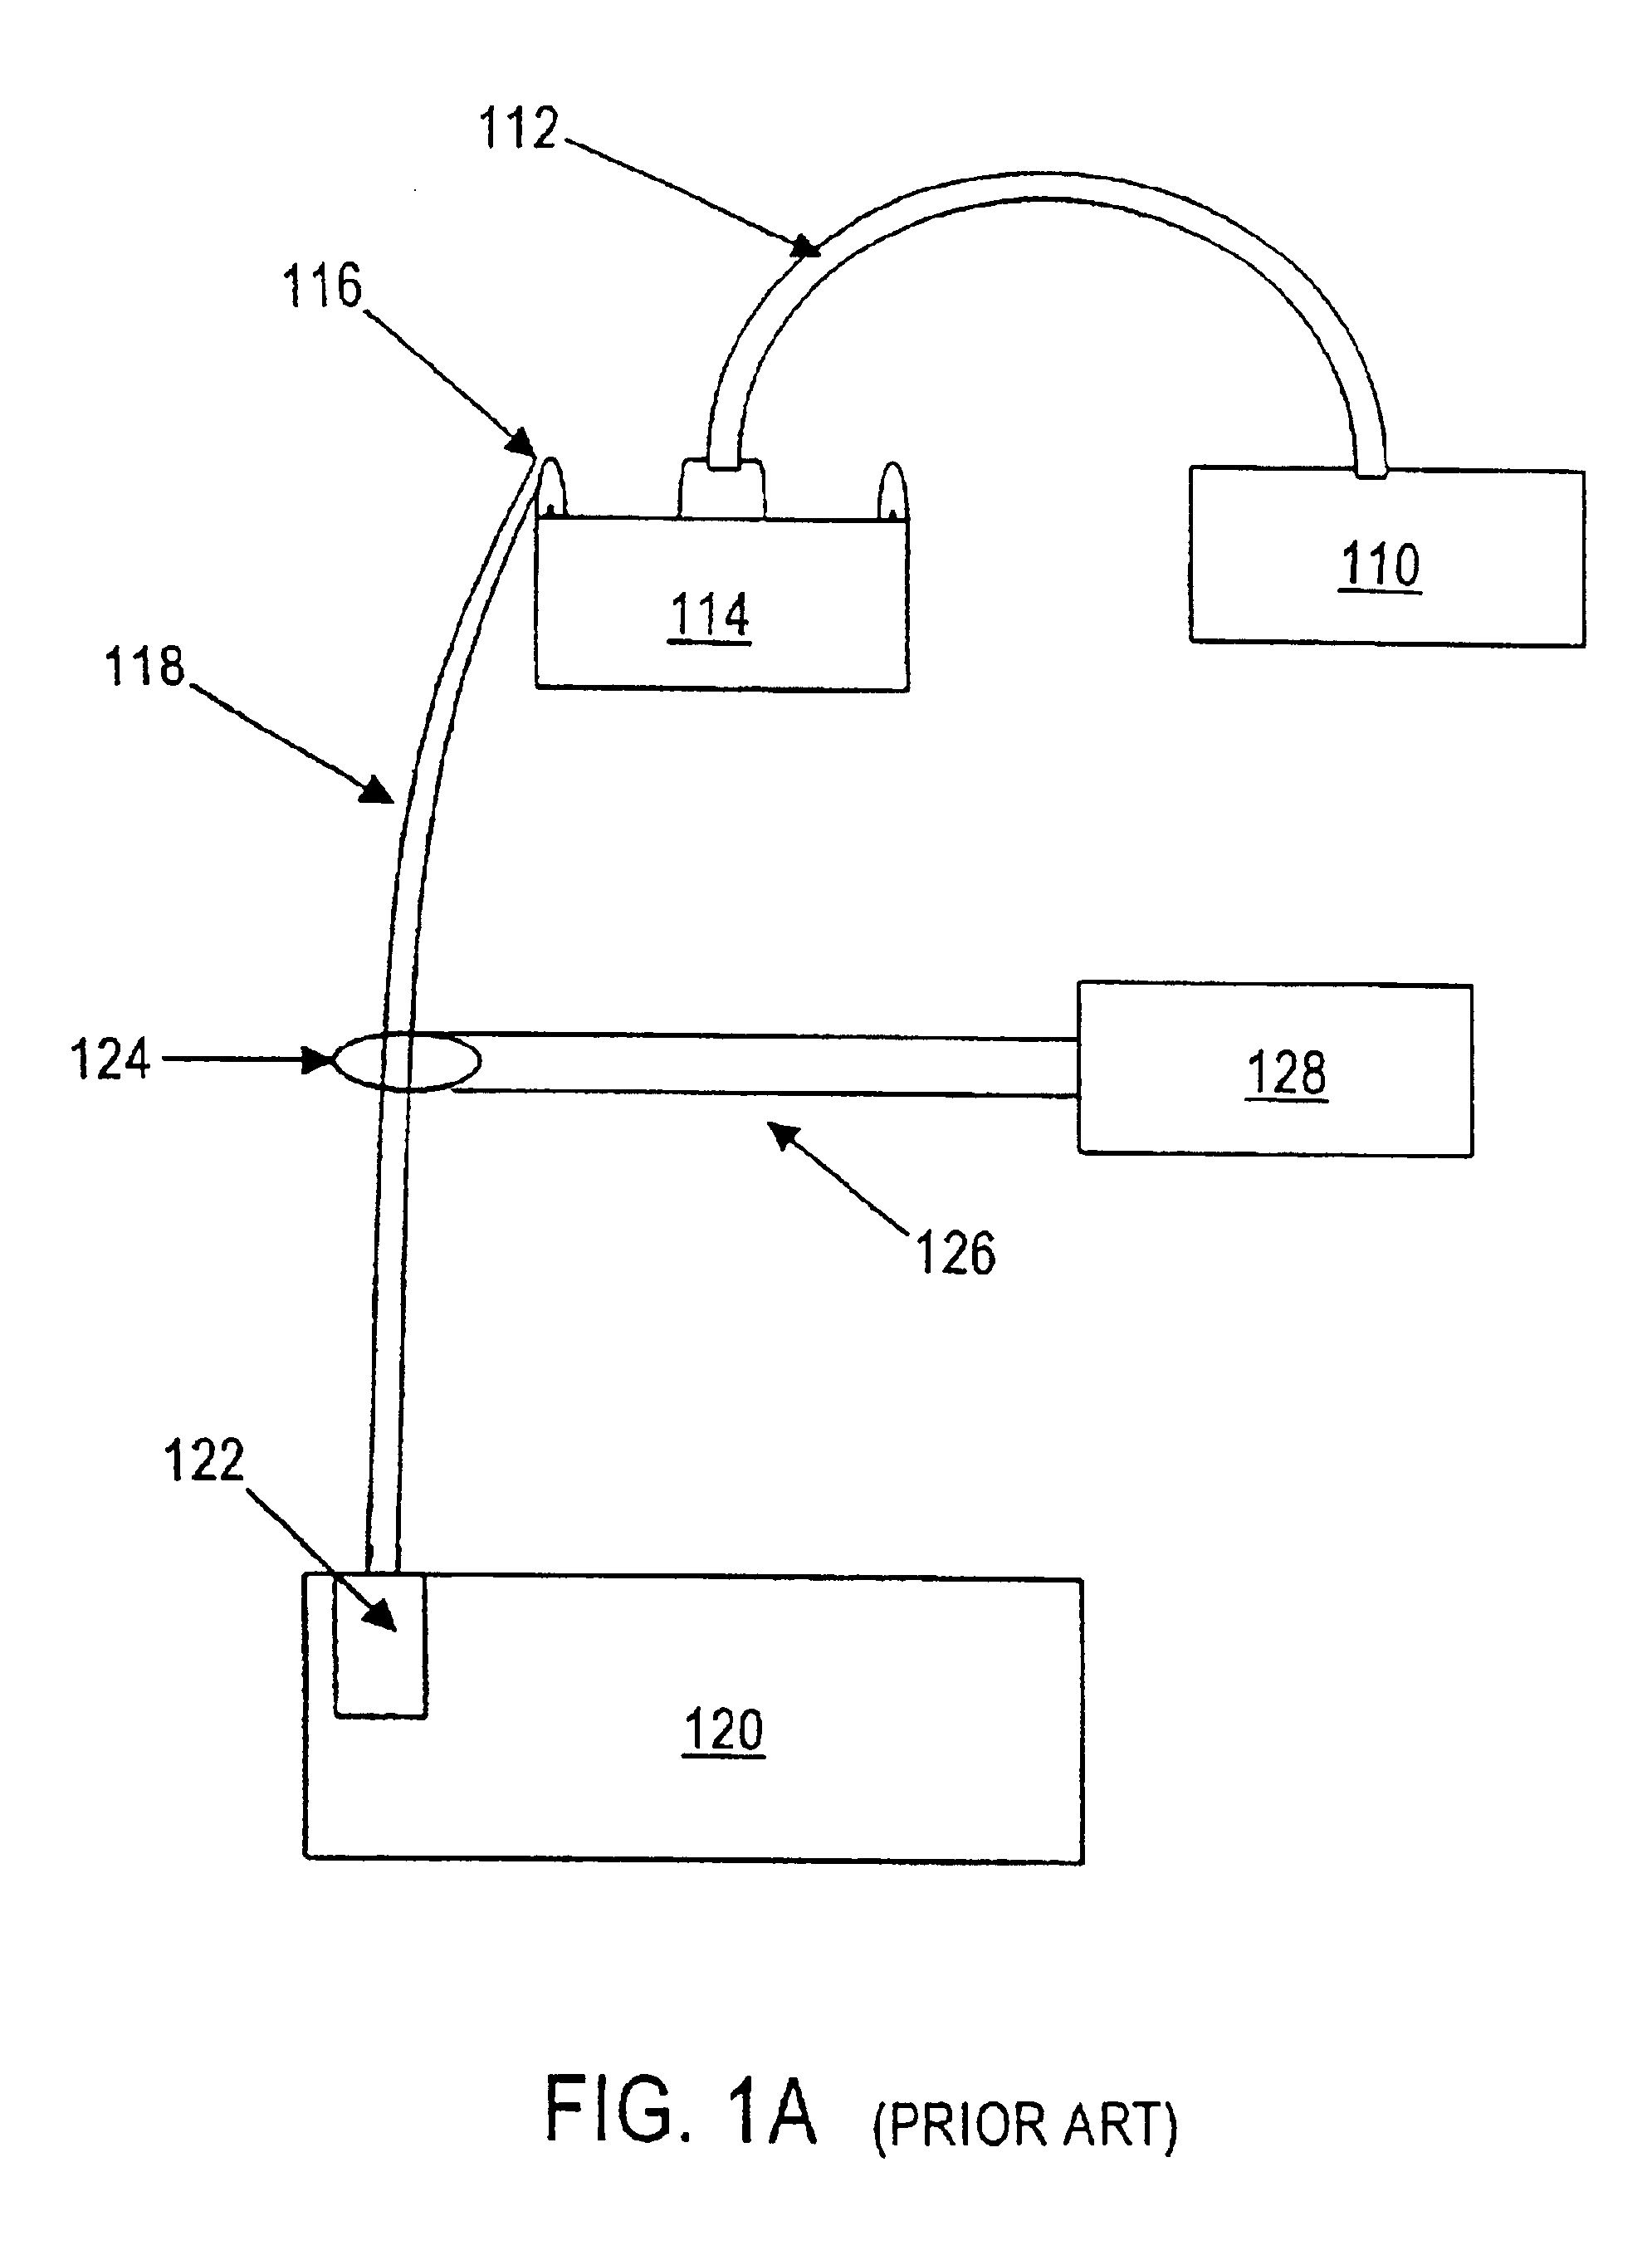 Coil on plug capacitive signal amplification and method of determining burn-time